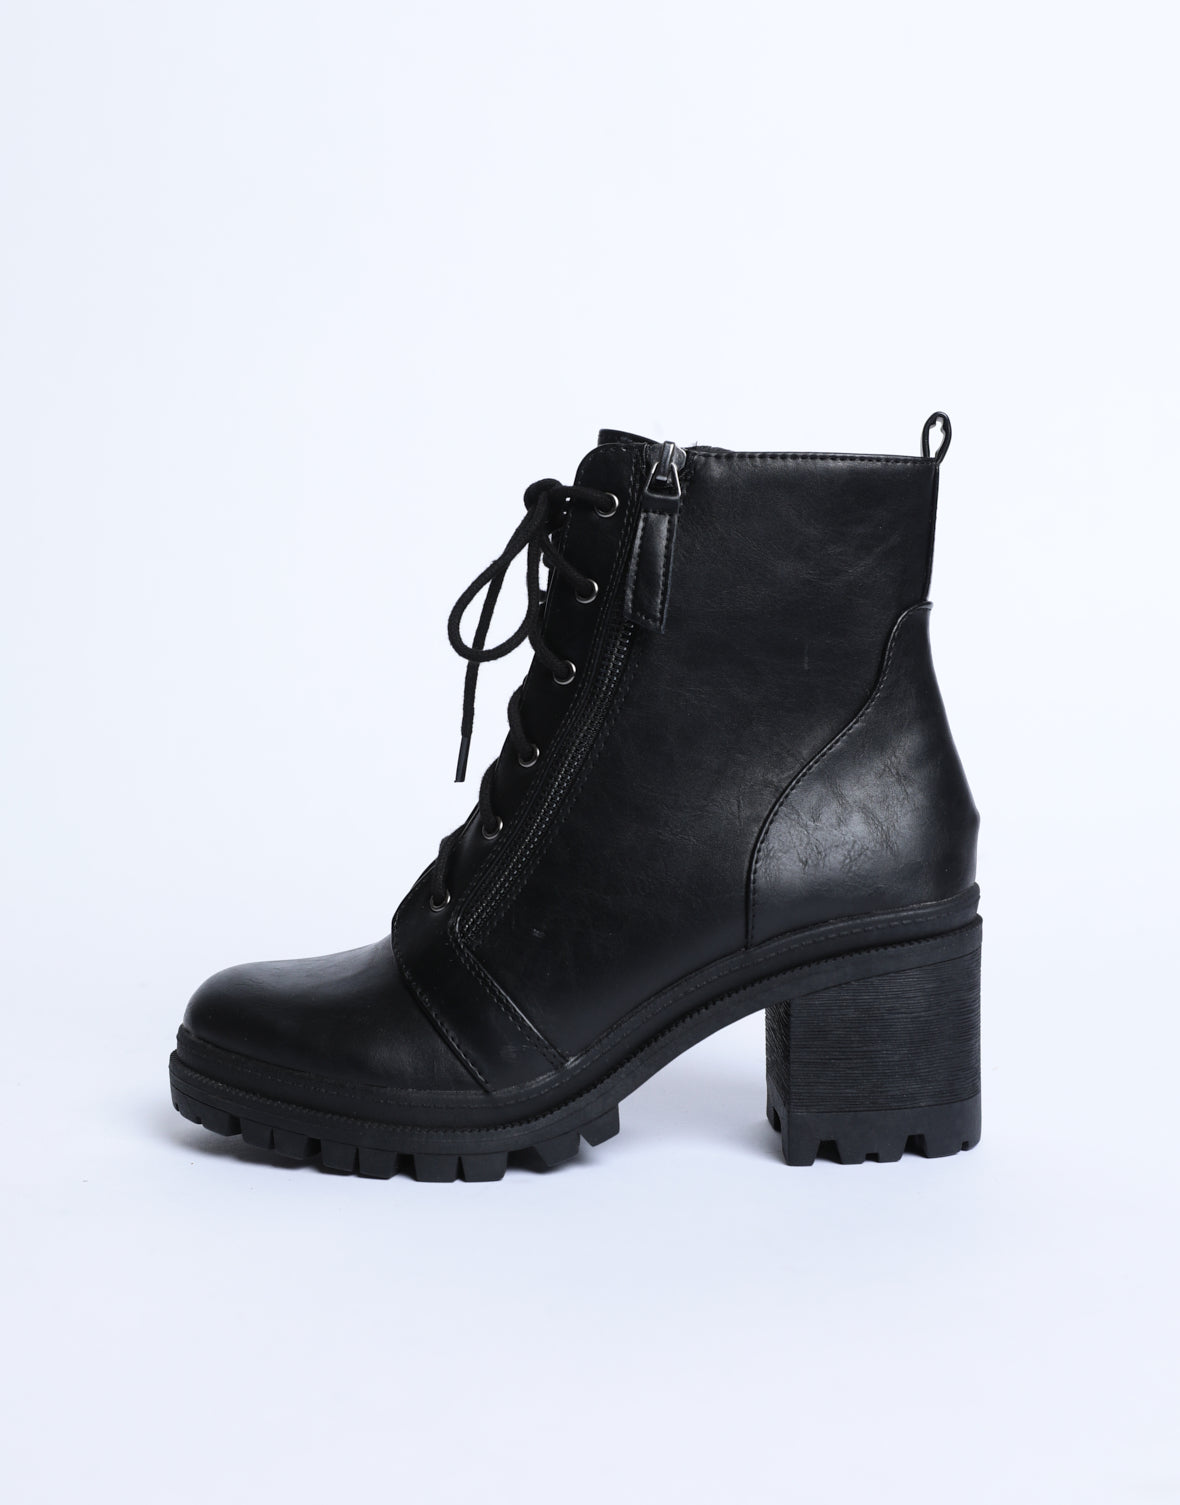 edgy black boots